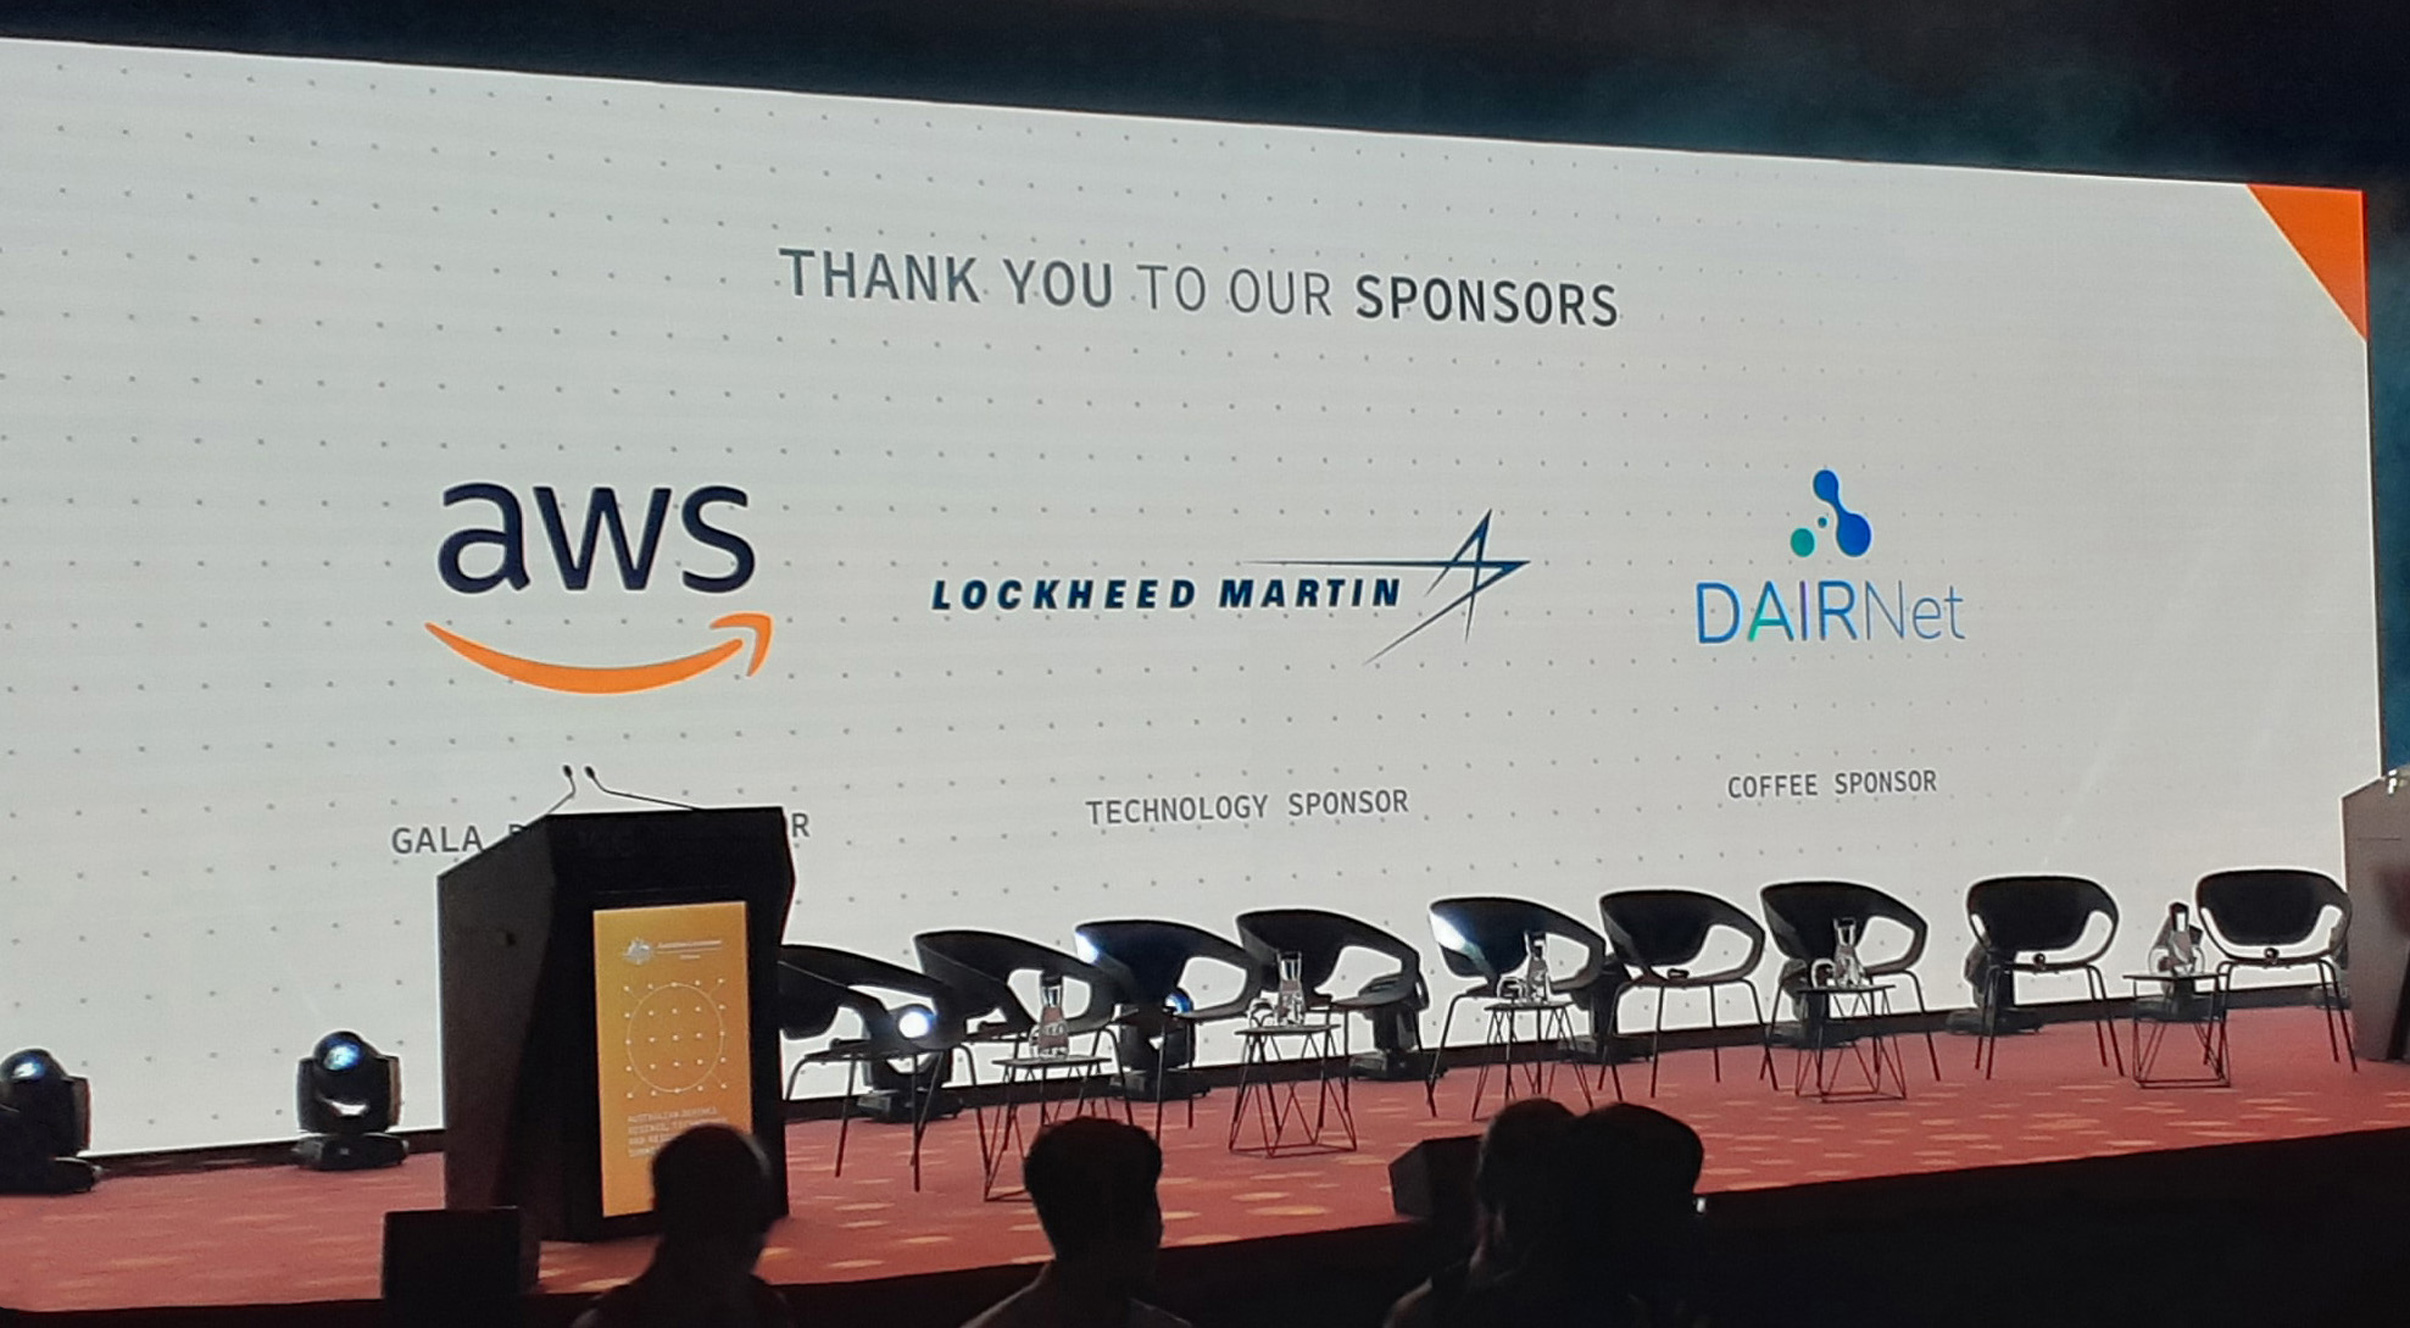 Stage at the ADSTAR Summit with a backdrop that says "Thank you to our sponsors" followed by the logos of AWS as gala dinner sponsor, Lockheed Martin as technology sponsor and DAIRNet as coffee sponsor.